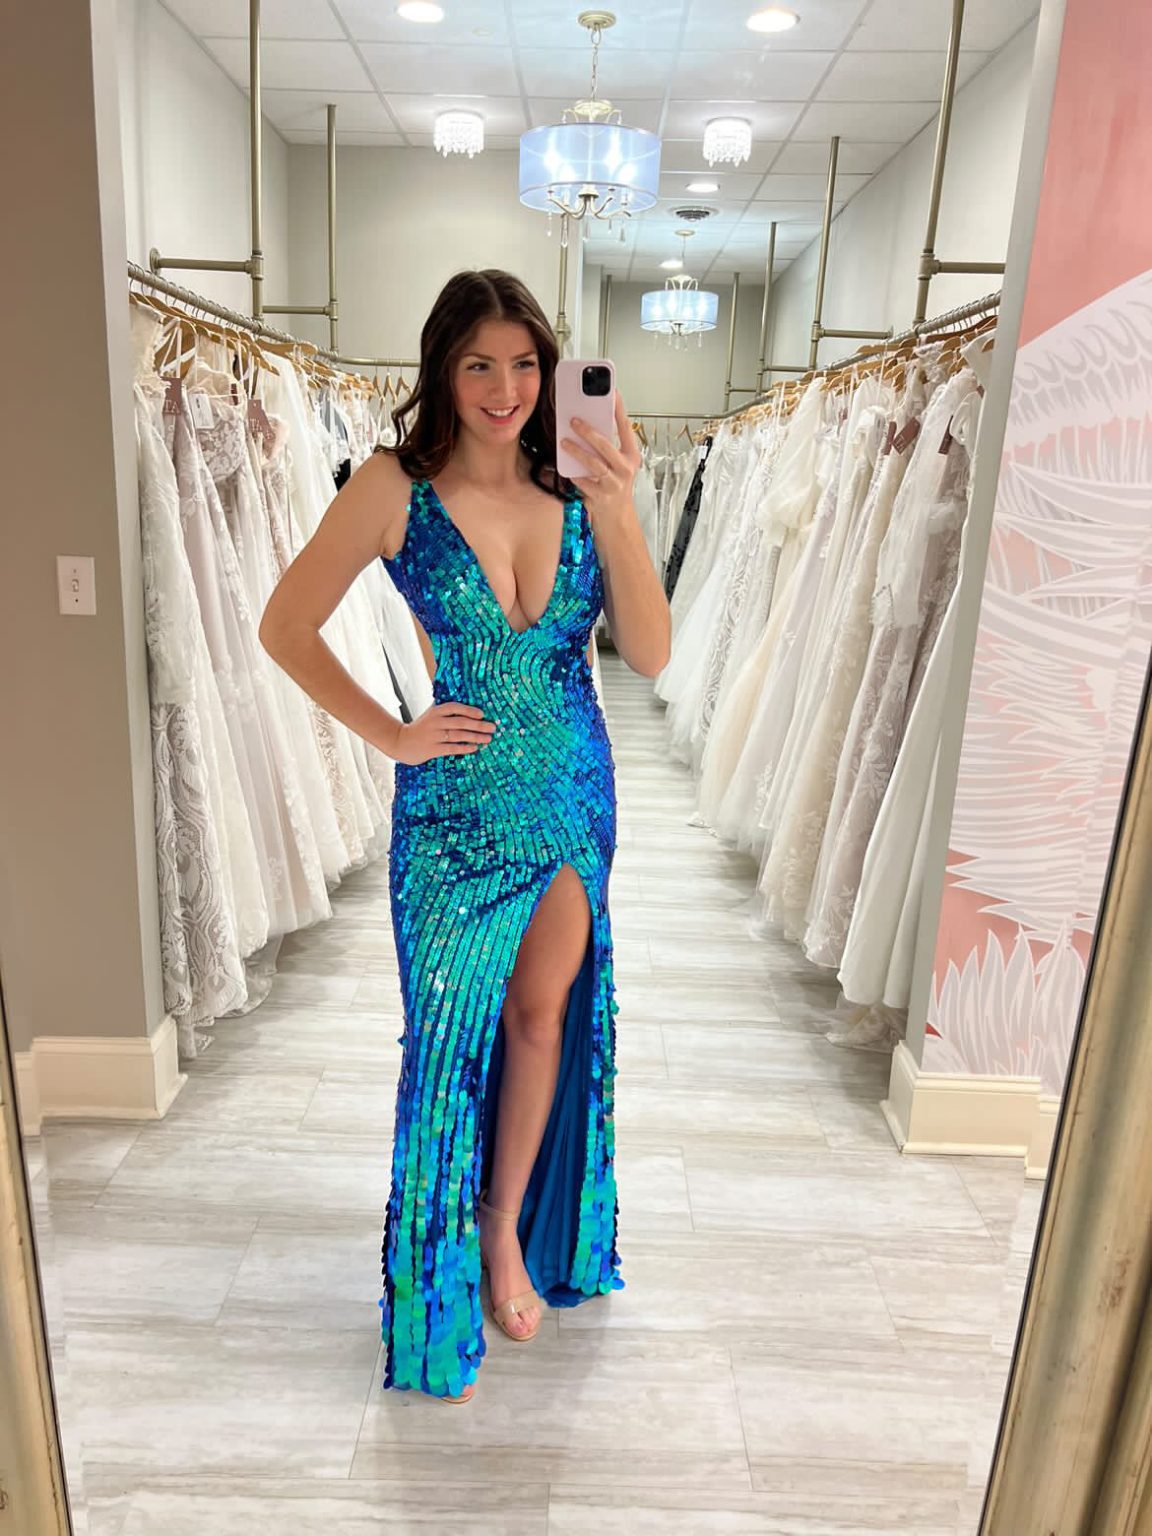 Students Share Their Prom Dresses – THE PROWLER